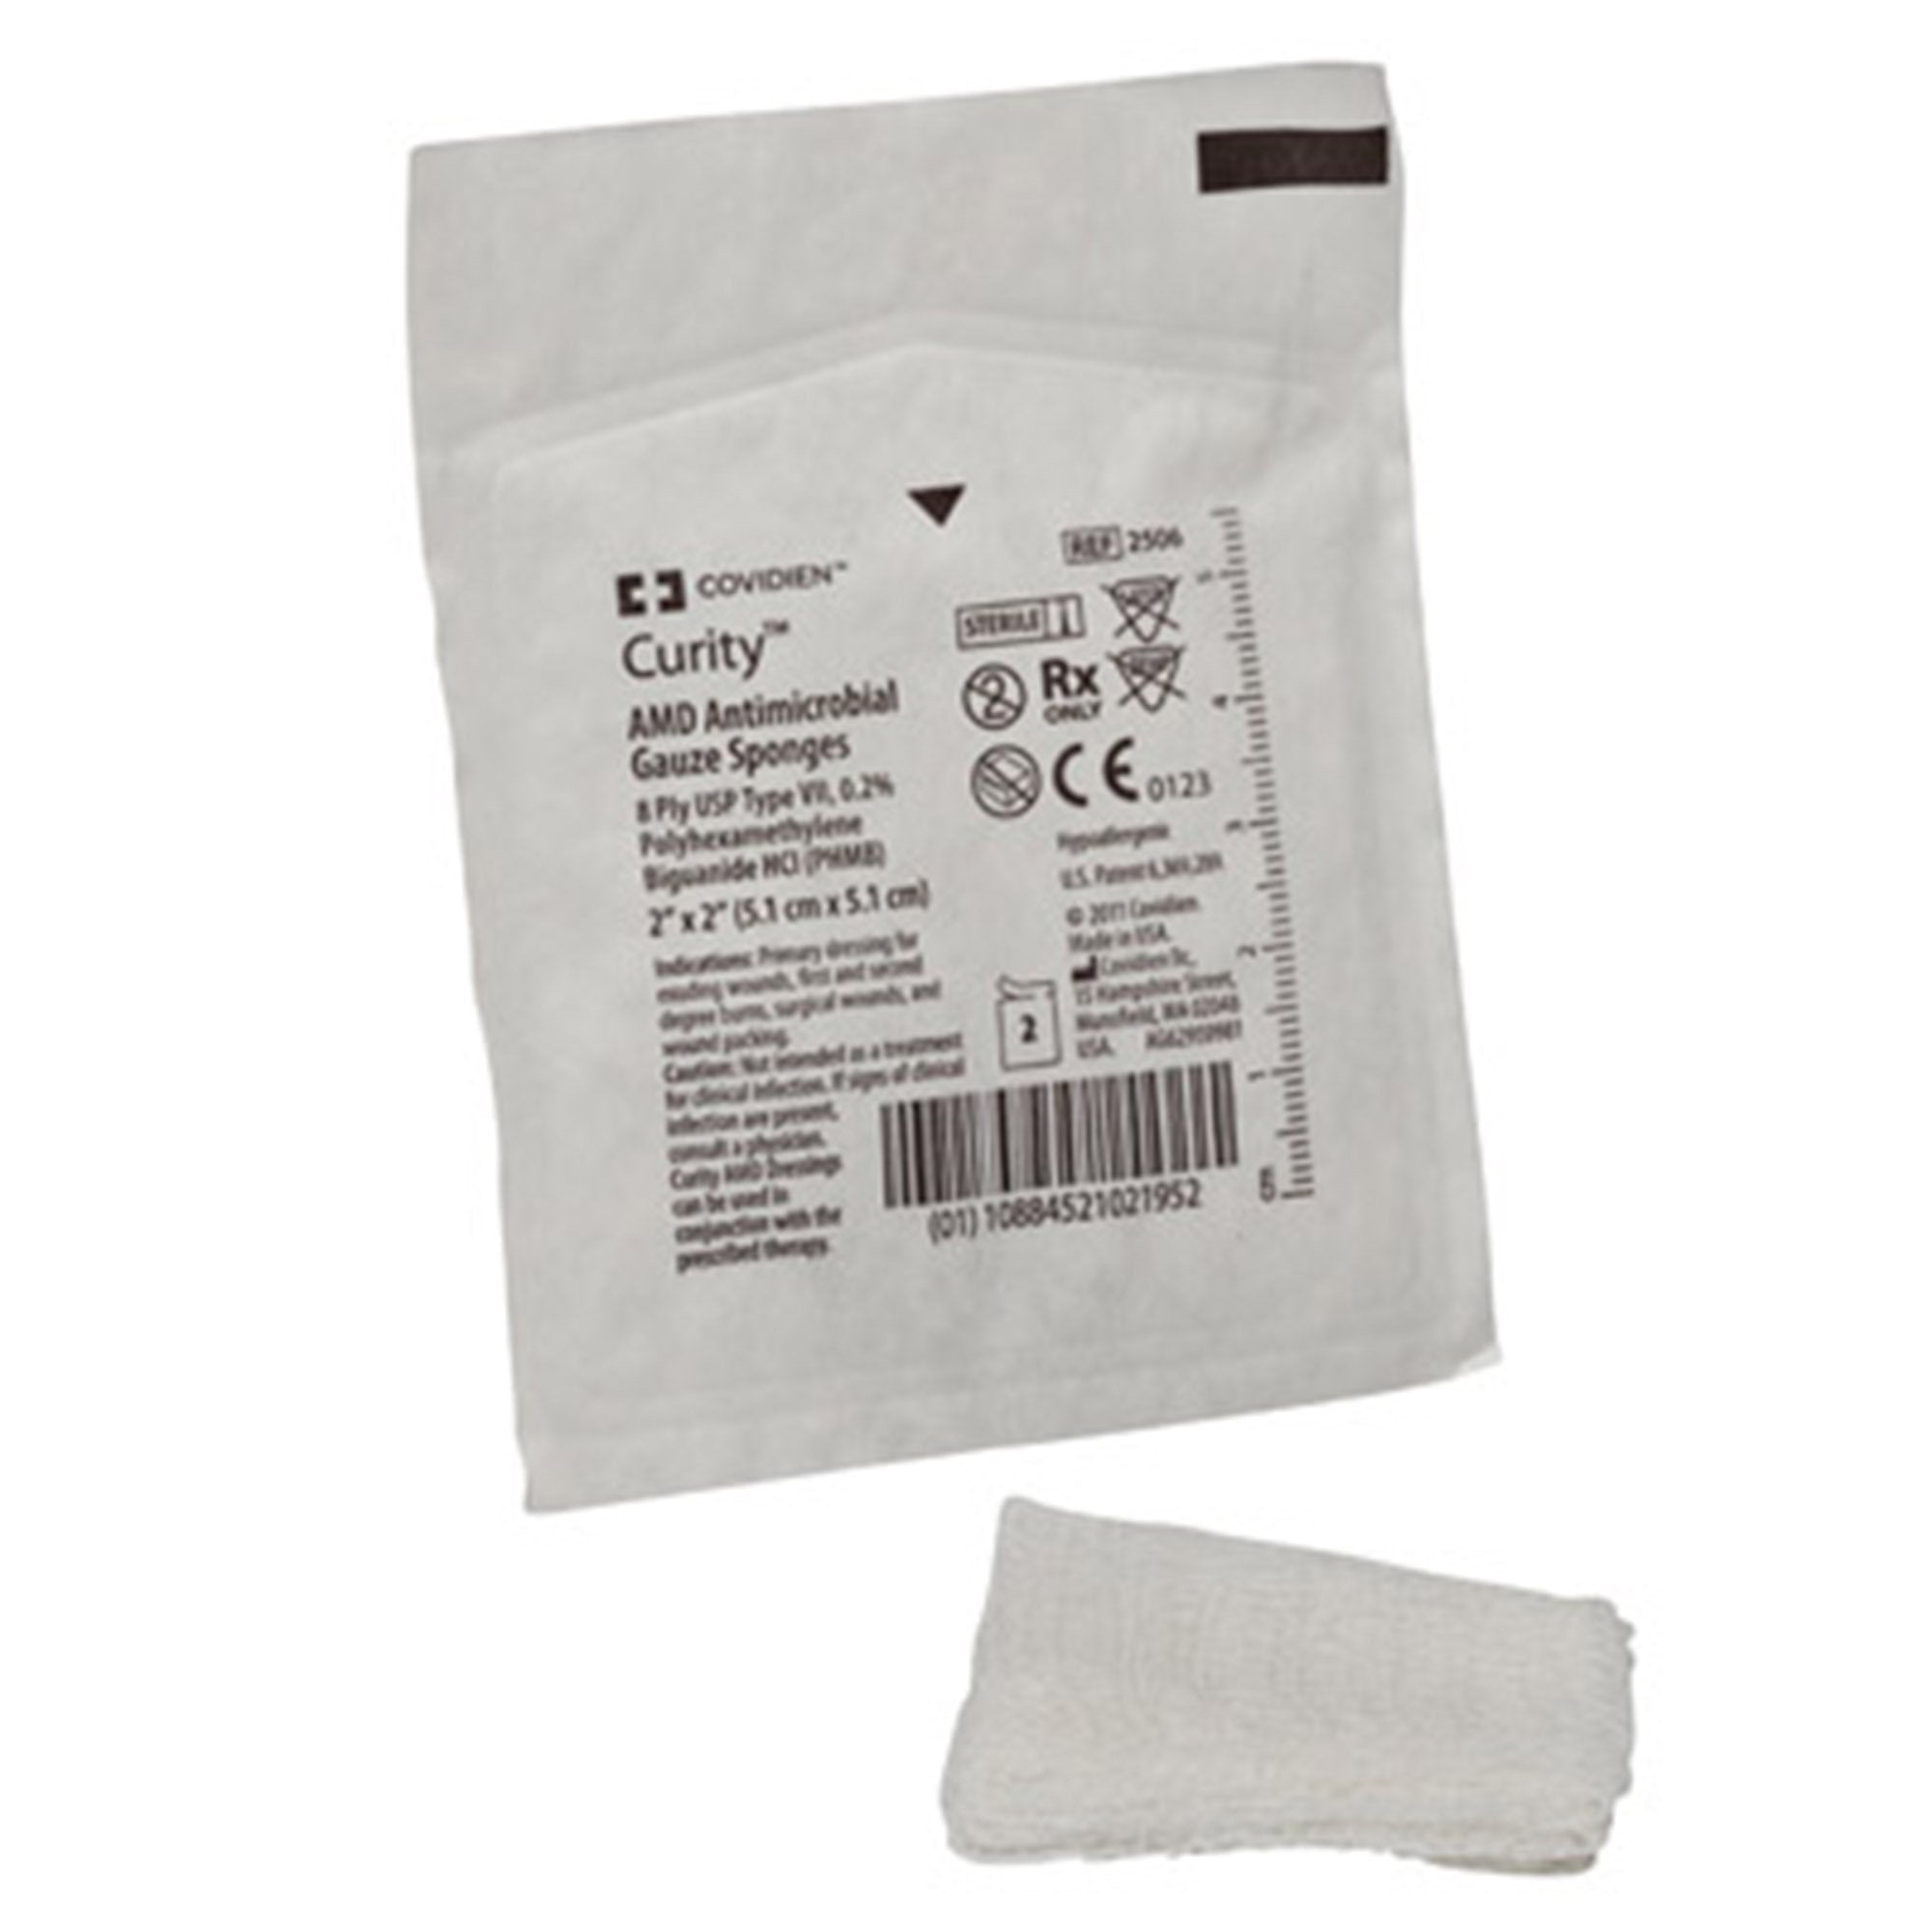 Gauze Sponge Curity™ AMD™ 2 X 2 Inch 2 per Pack Sterile 8-Ply PHMB Square